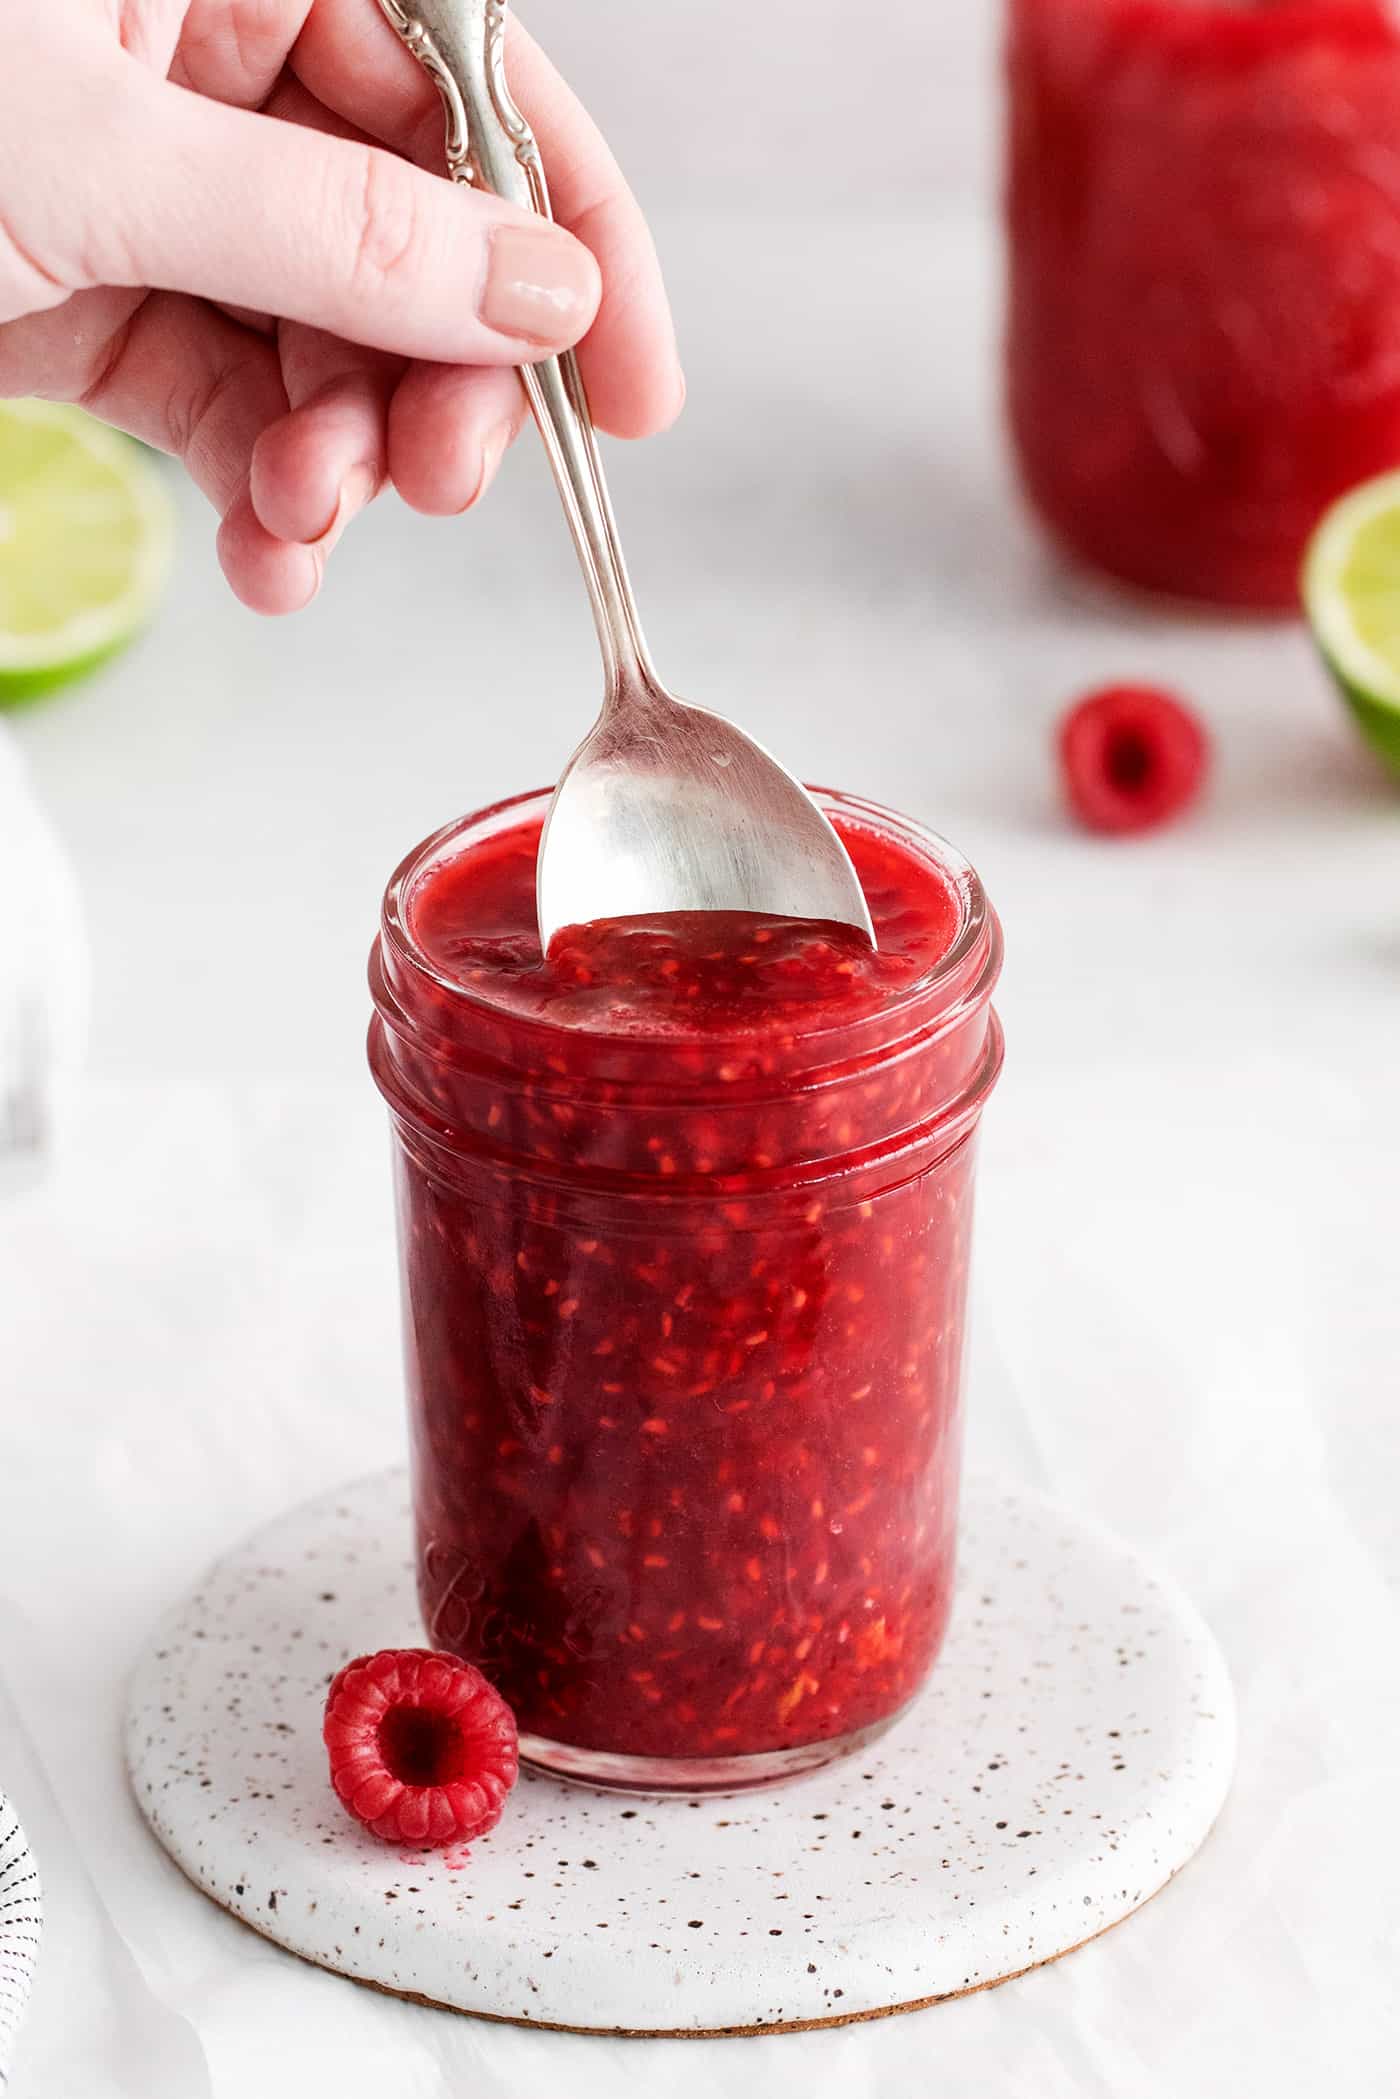 A spoon diving into a jar of raspberry sauce